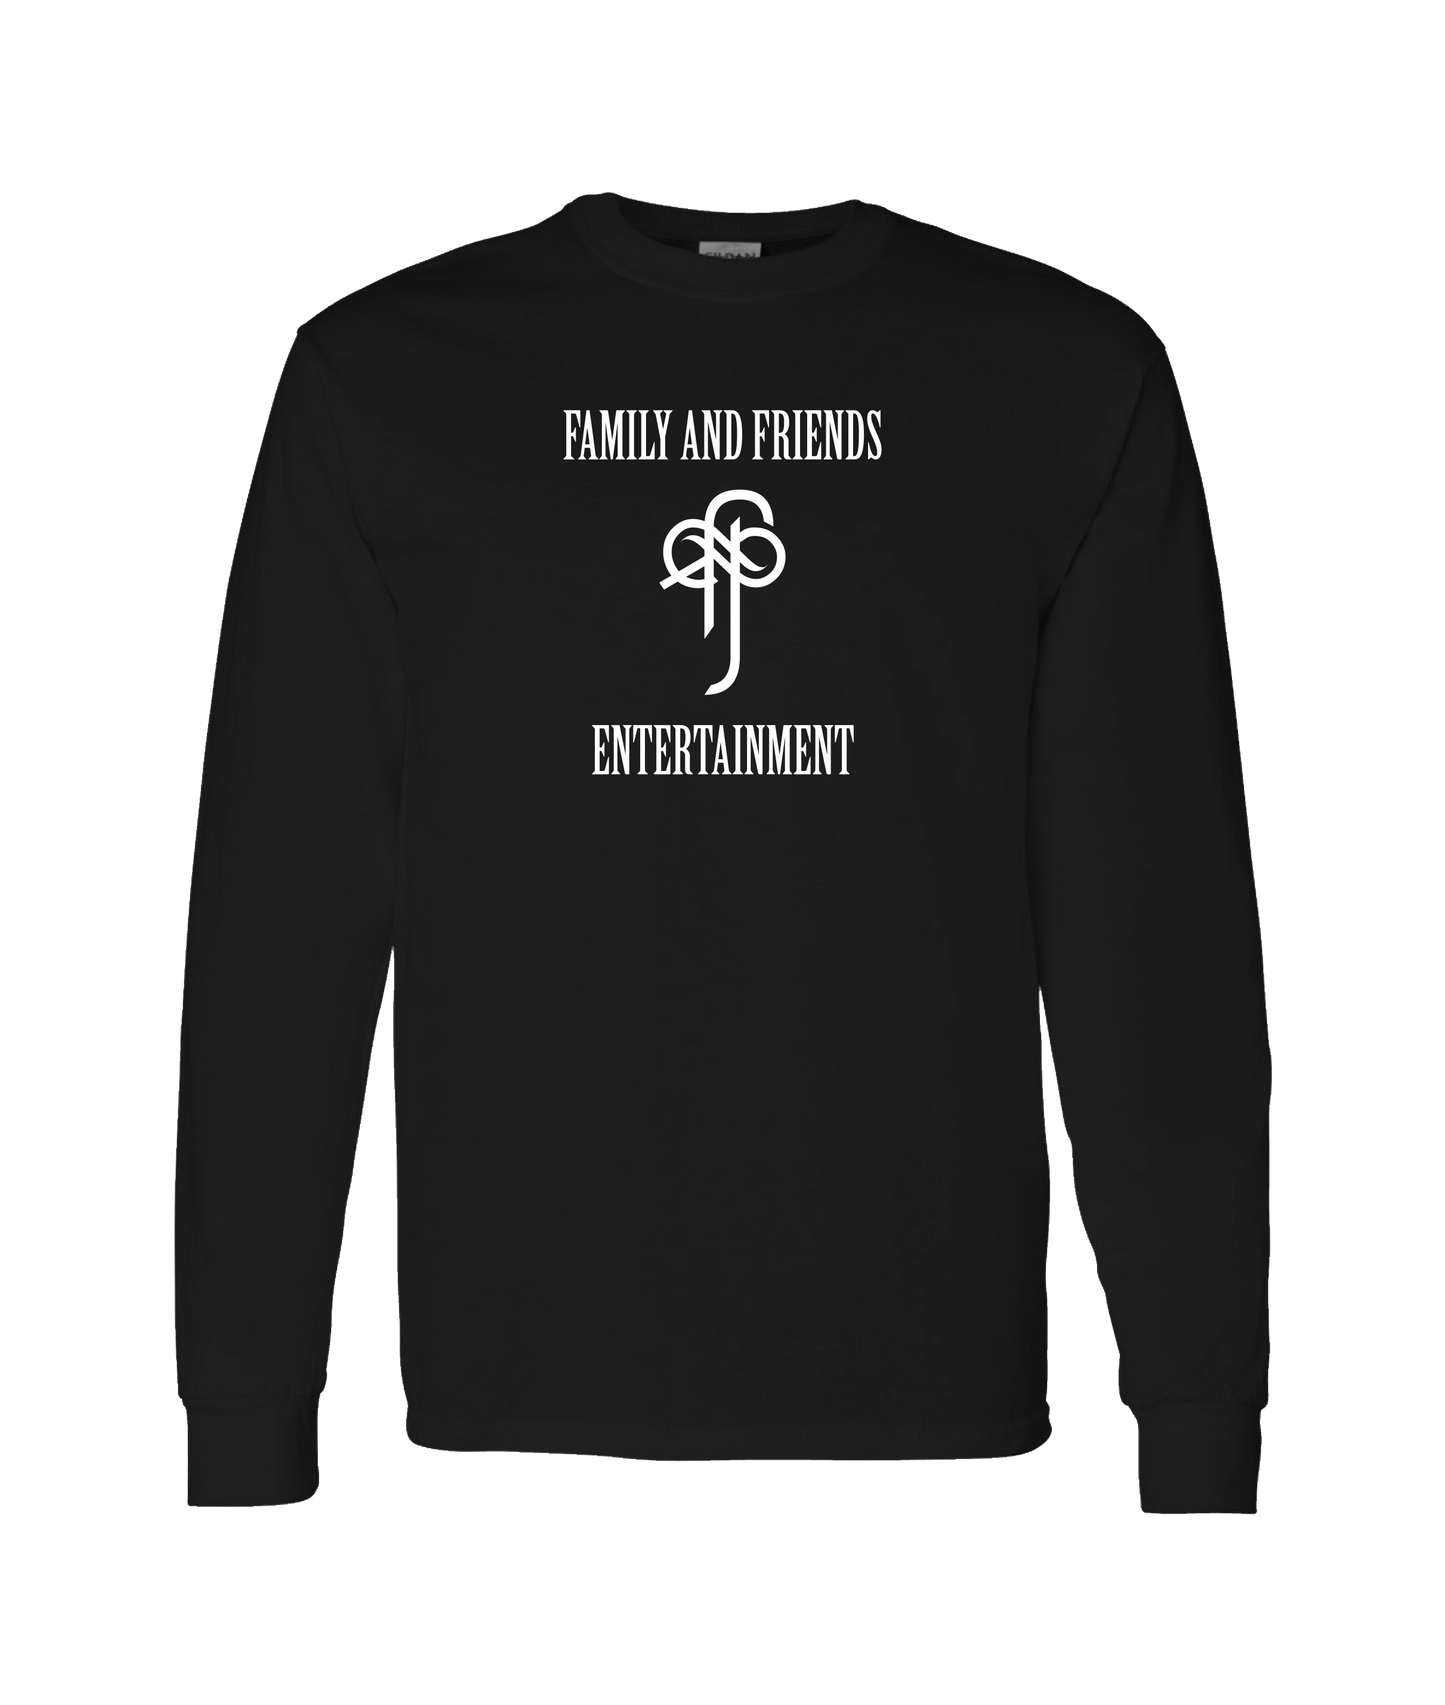 Sincrawford - Family and Friends Ent.  - Black Long Sleeve T